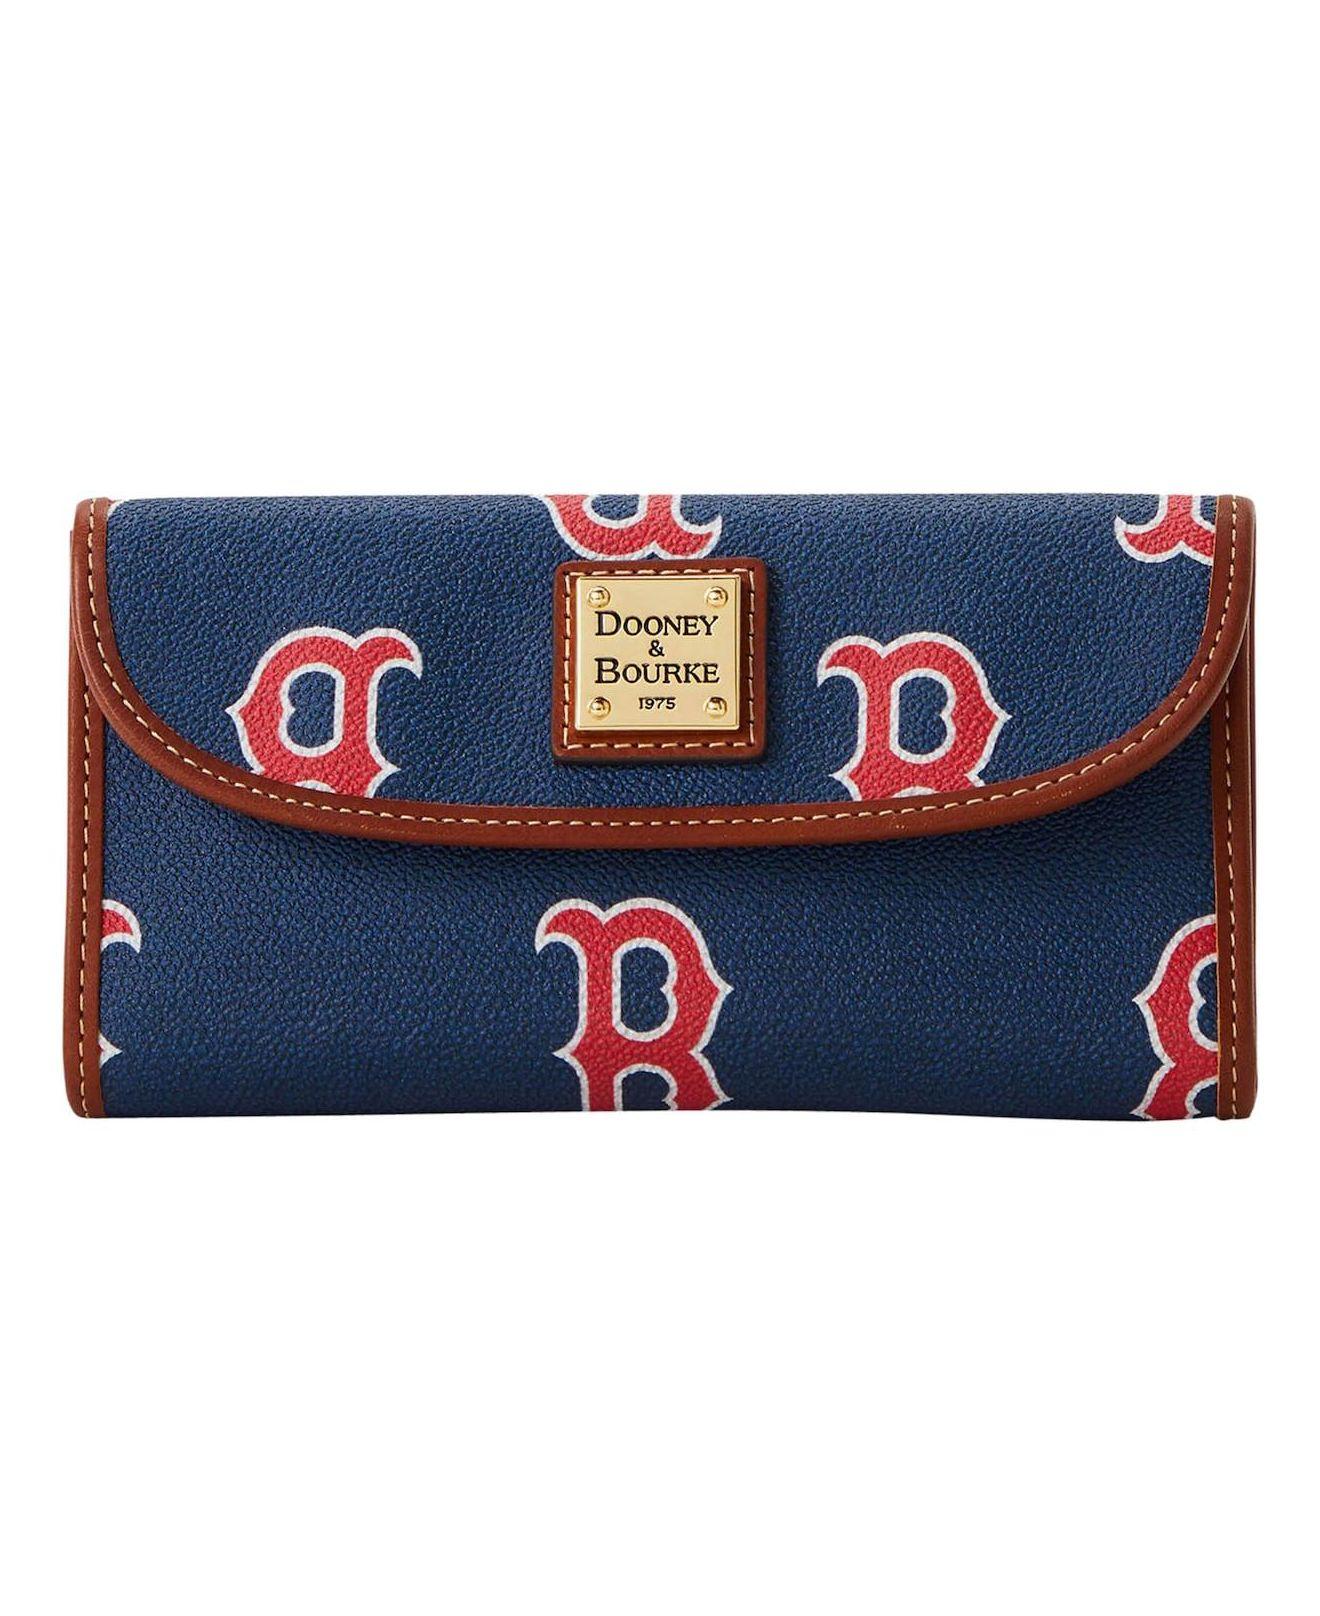 Officially Licensed MLB Fold Over Crossbody Purse- St. Louis Cardinals